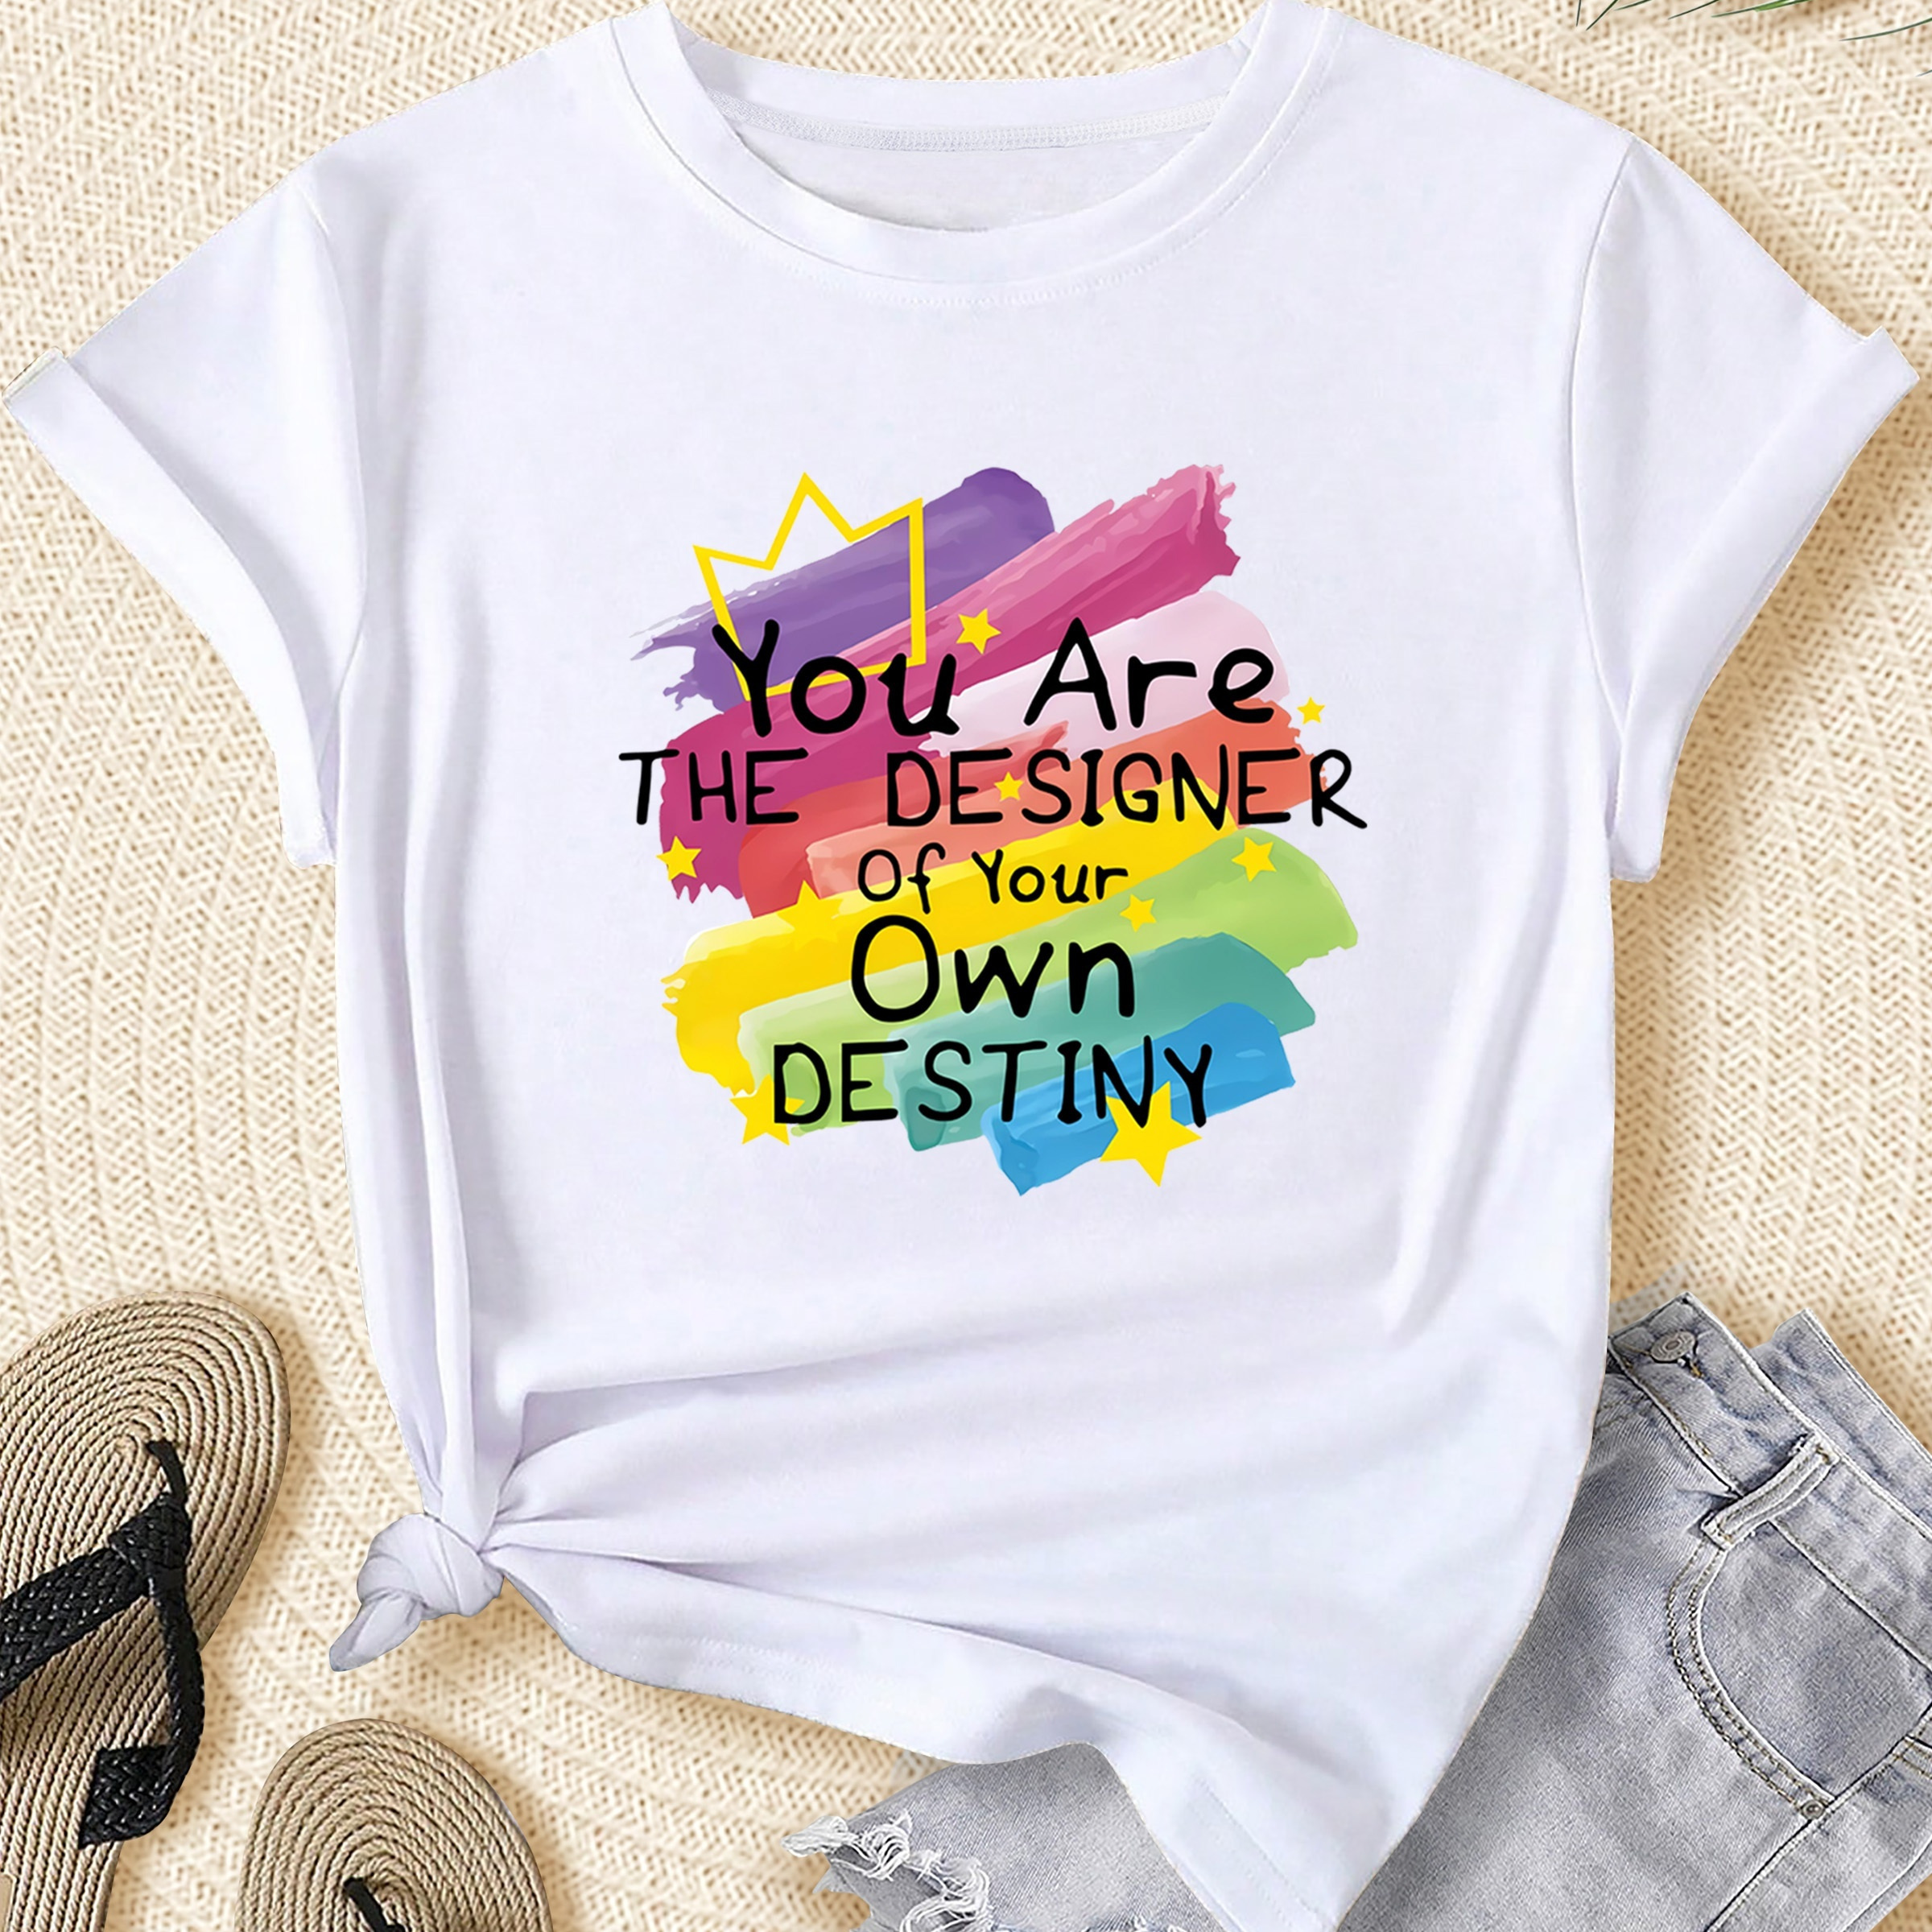 

Women's Plus Size Casual Sporty T-shirt, Colorful Graffiti And Inspirational Quote Print, Comfort Fit Short Sleeve Tee, Fashion Breathable Casual Top